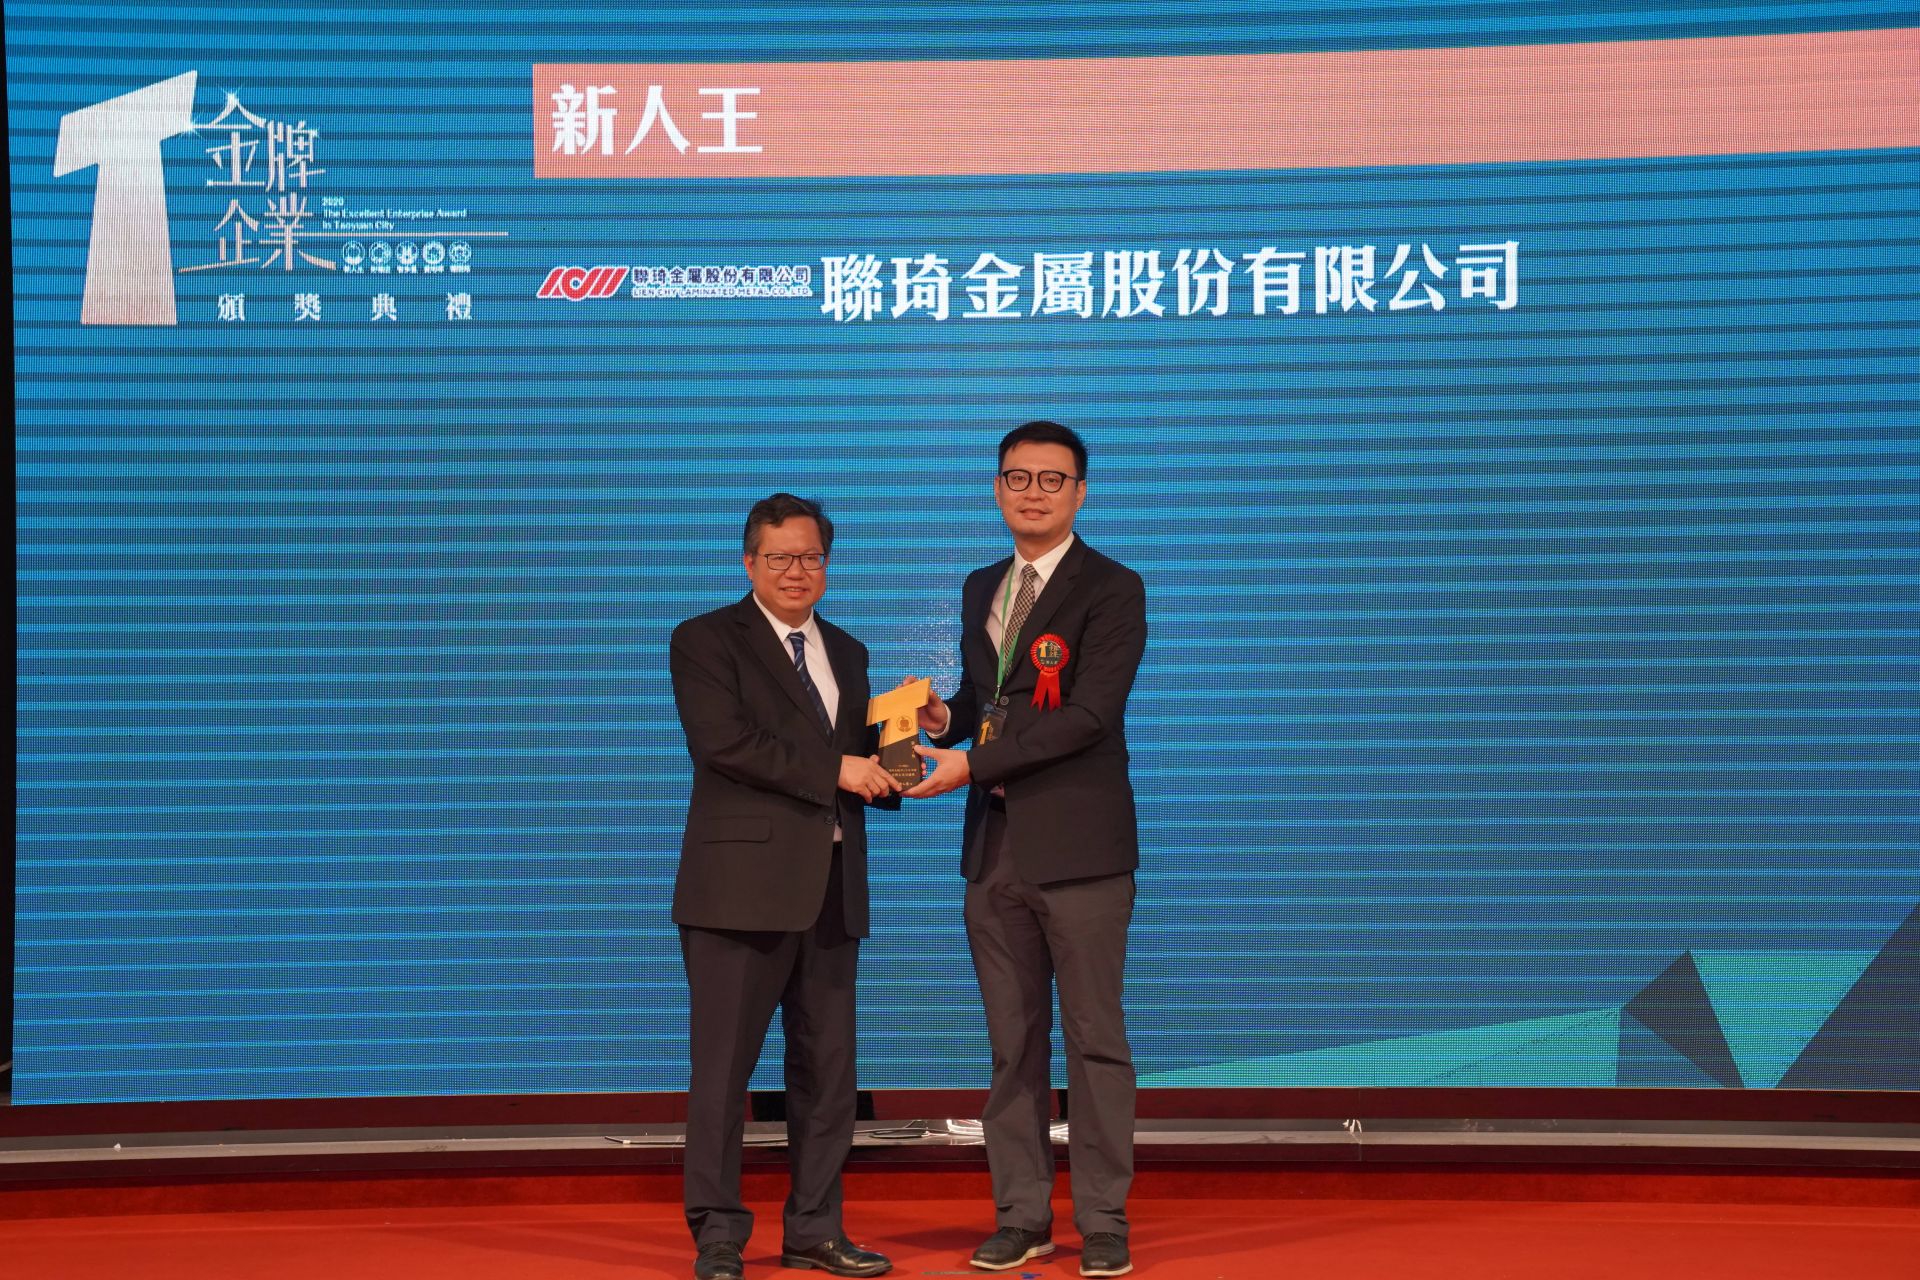 Taoyuan City Mayor and Lien Chy's General Manager Dr. Chuang at the Awards Ceremony